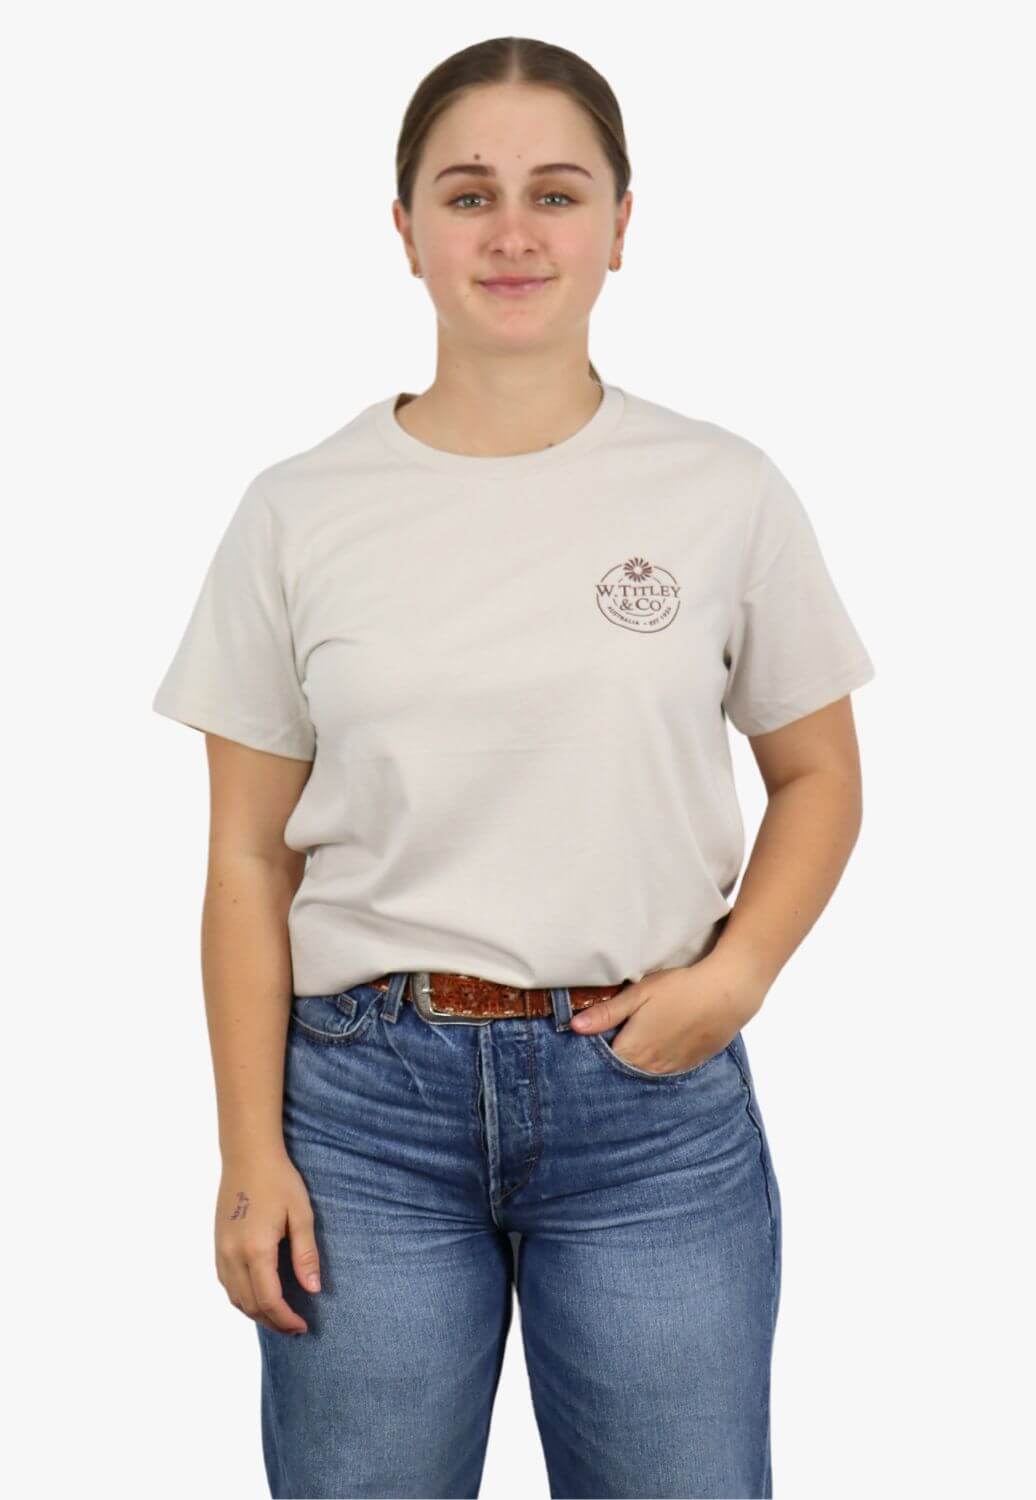 W. Titley and Co CLOTHING-WomensT-Shirts W. Titley & Co. Womens Original T-Shirt